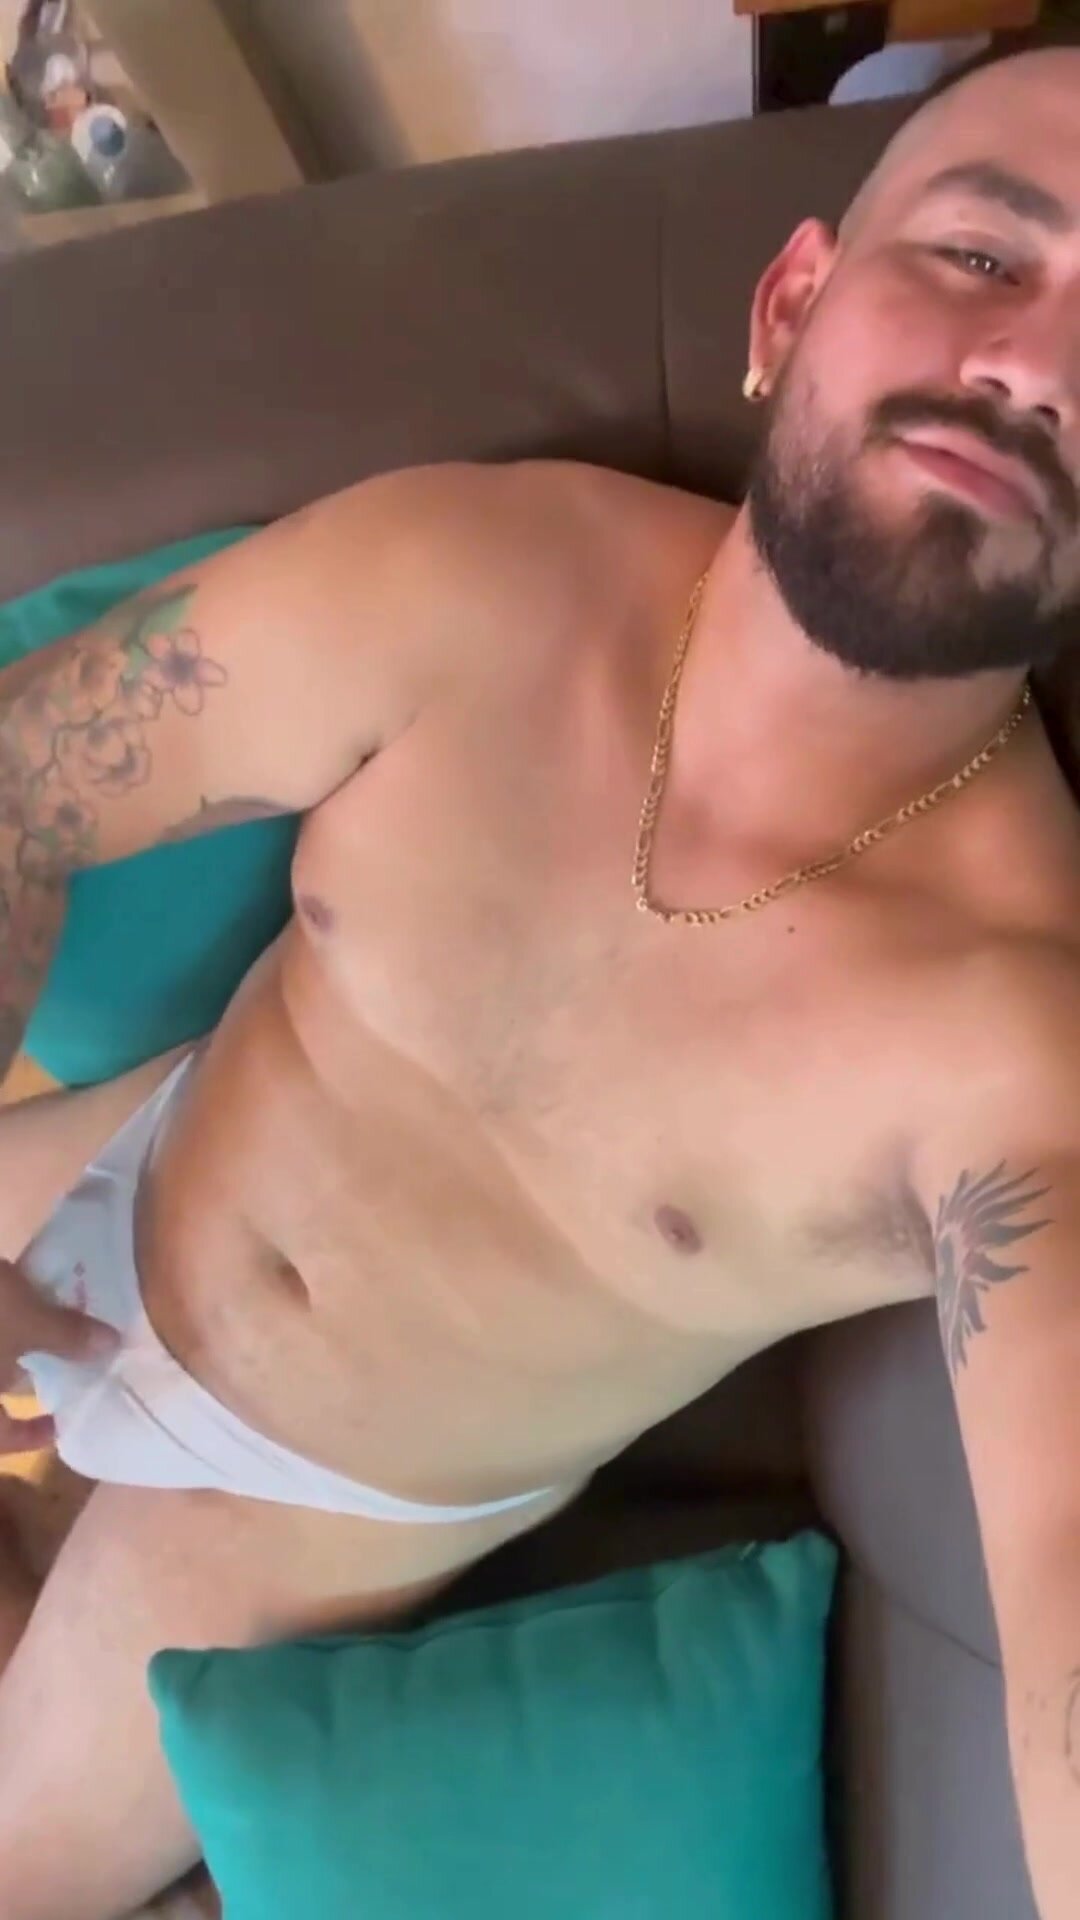 Beefy guy shows off his hairy pits and big bulge